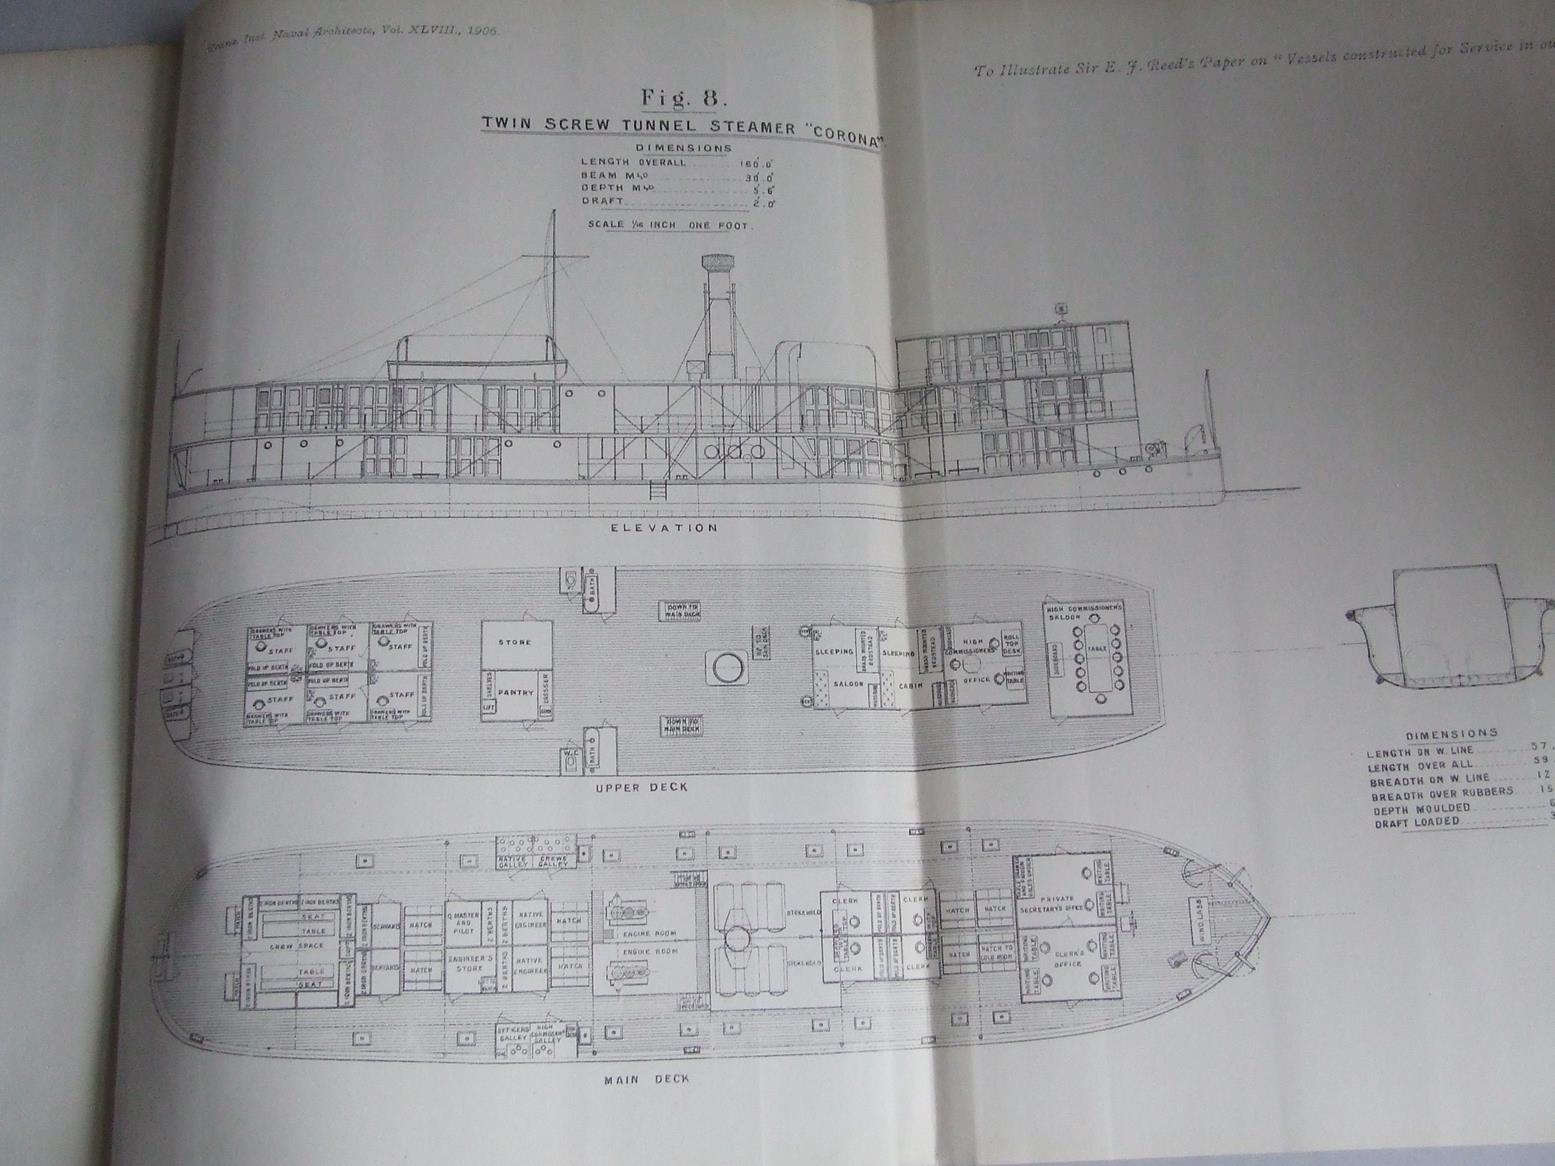 On Vessels Constructed for Service in our Colonies and Protectorates